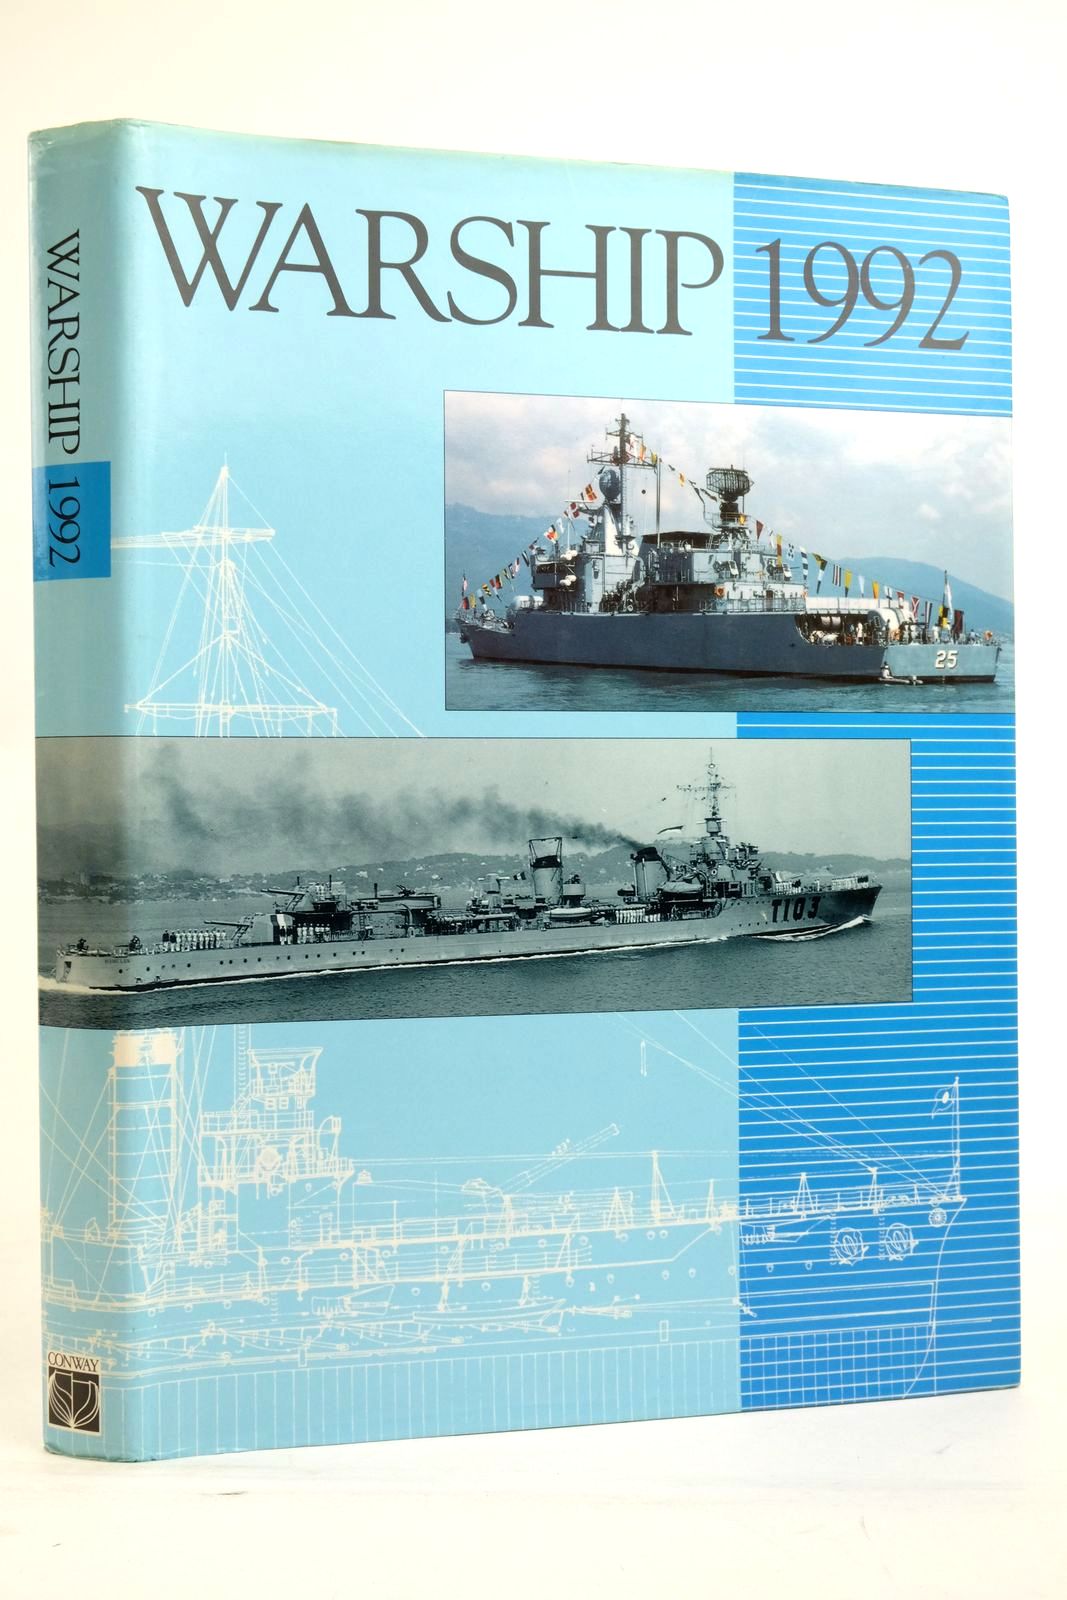 Photo of WARSHIP 1992 written by Gardiner, Robert published by Conway Maritime Press (STOCK CODE: 2136529)  for sale by Stella & Rose's Books